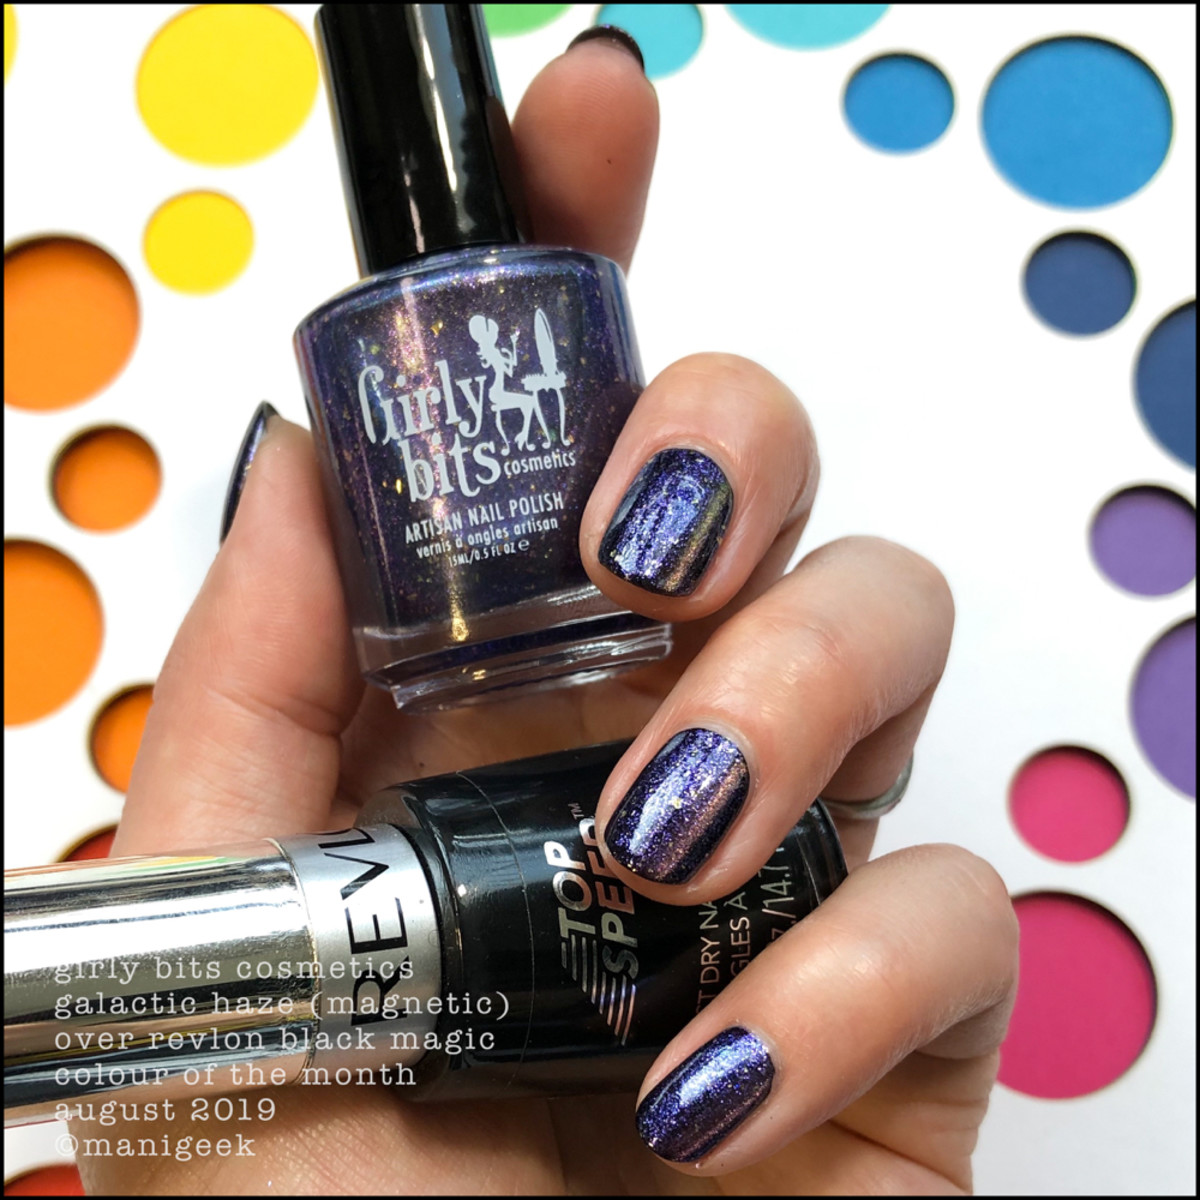 Girly Bits Galactic Haze Magnetic over Black - COTM August 2019